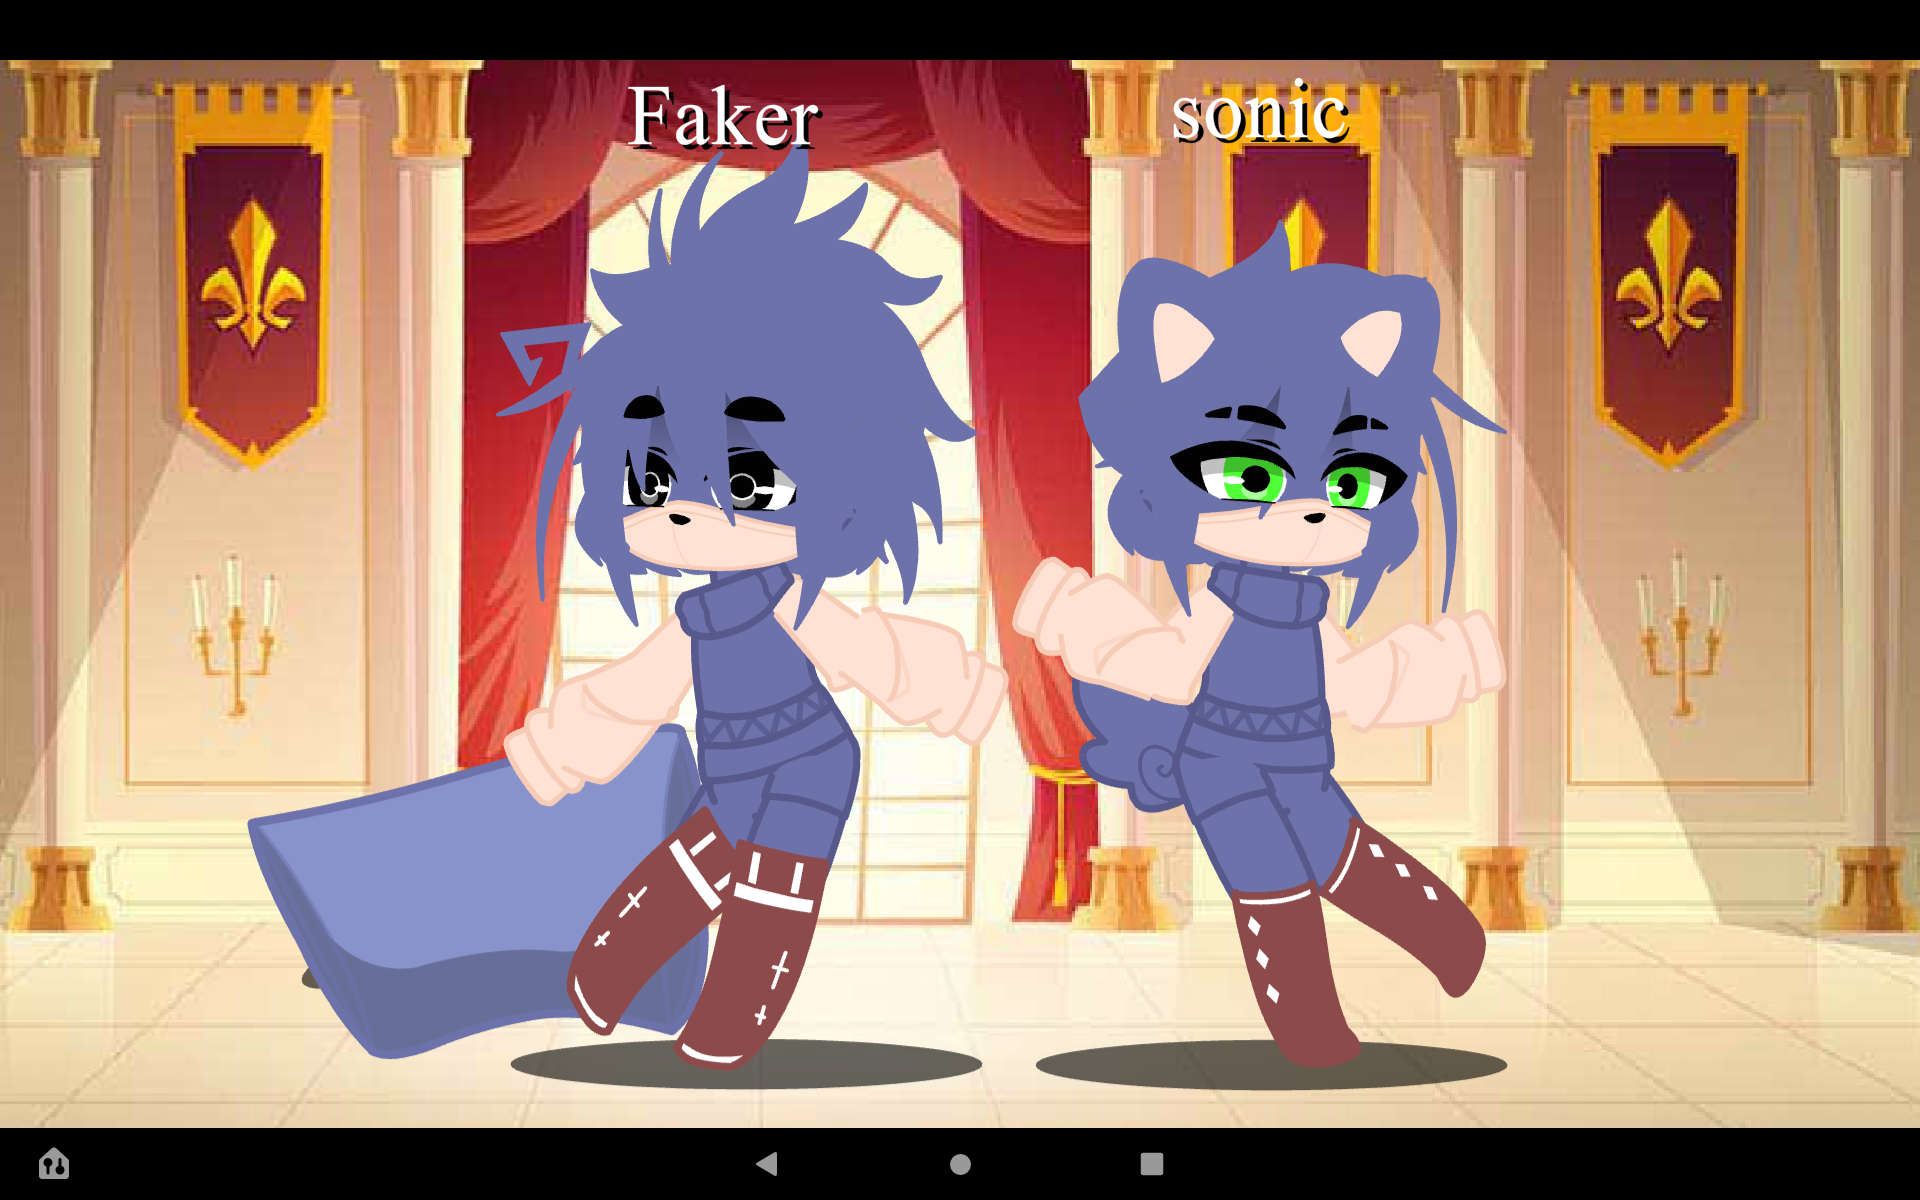 Post by Oxo~mike_afton~oxo in Gacha Cute Android comments 